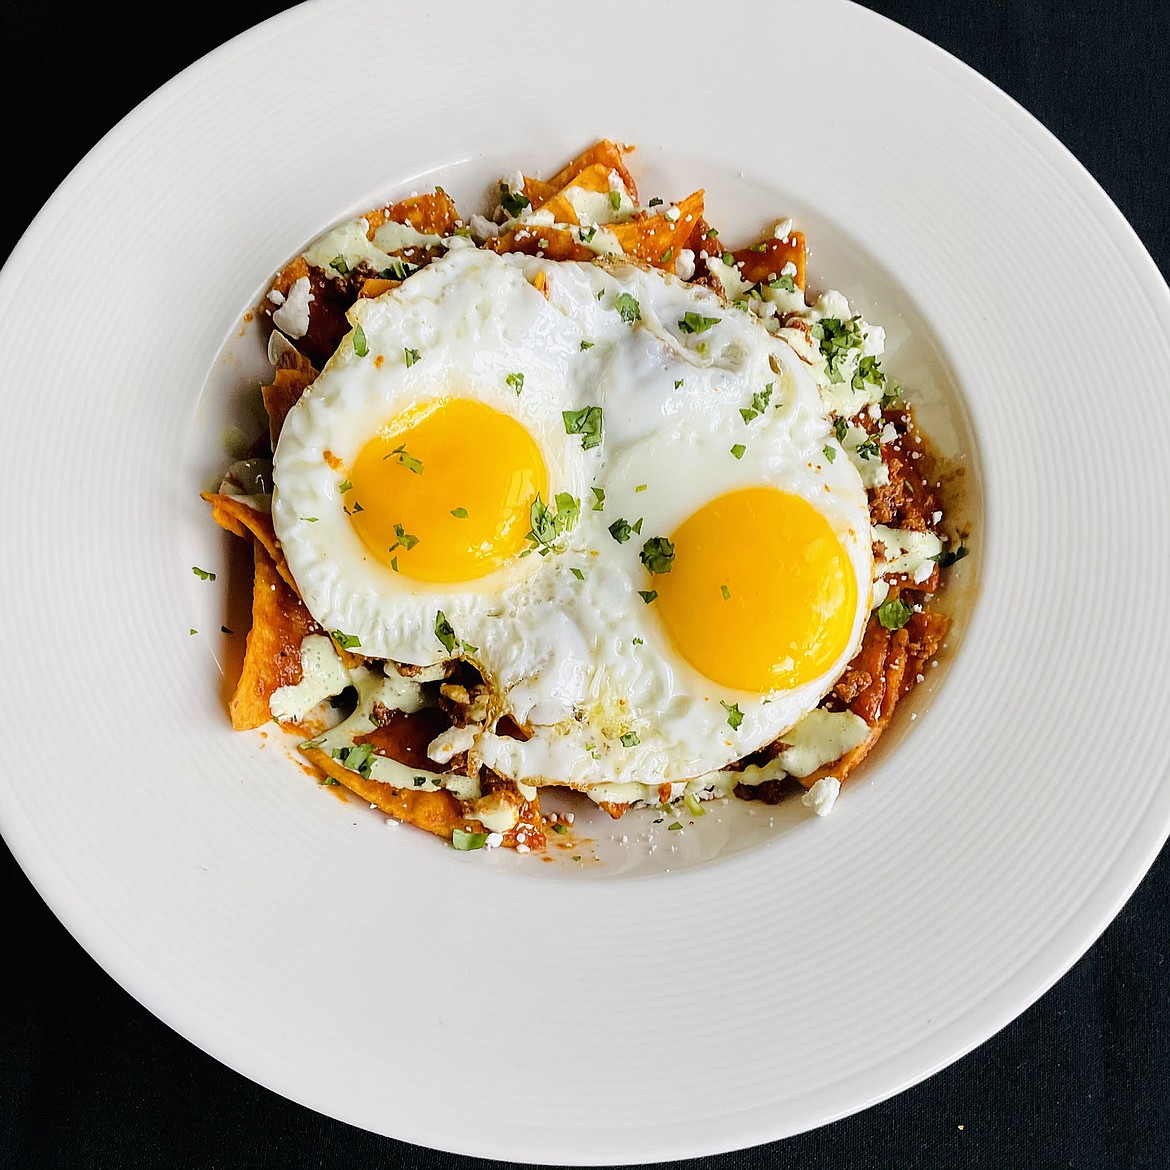 Chilaquiles from Schafer's Restaurant.
Courtesy Jonathan May